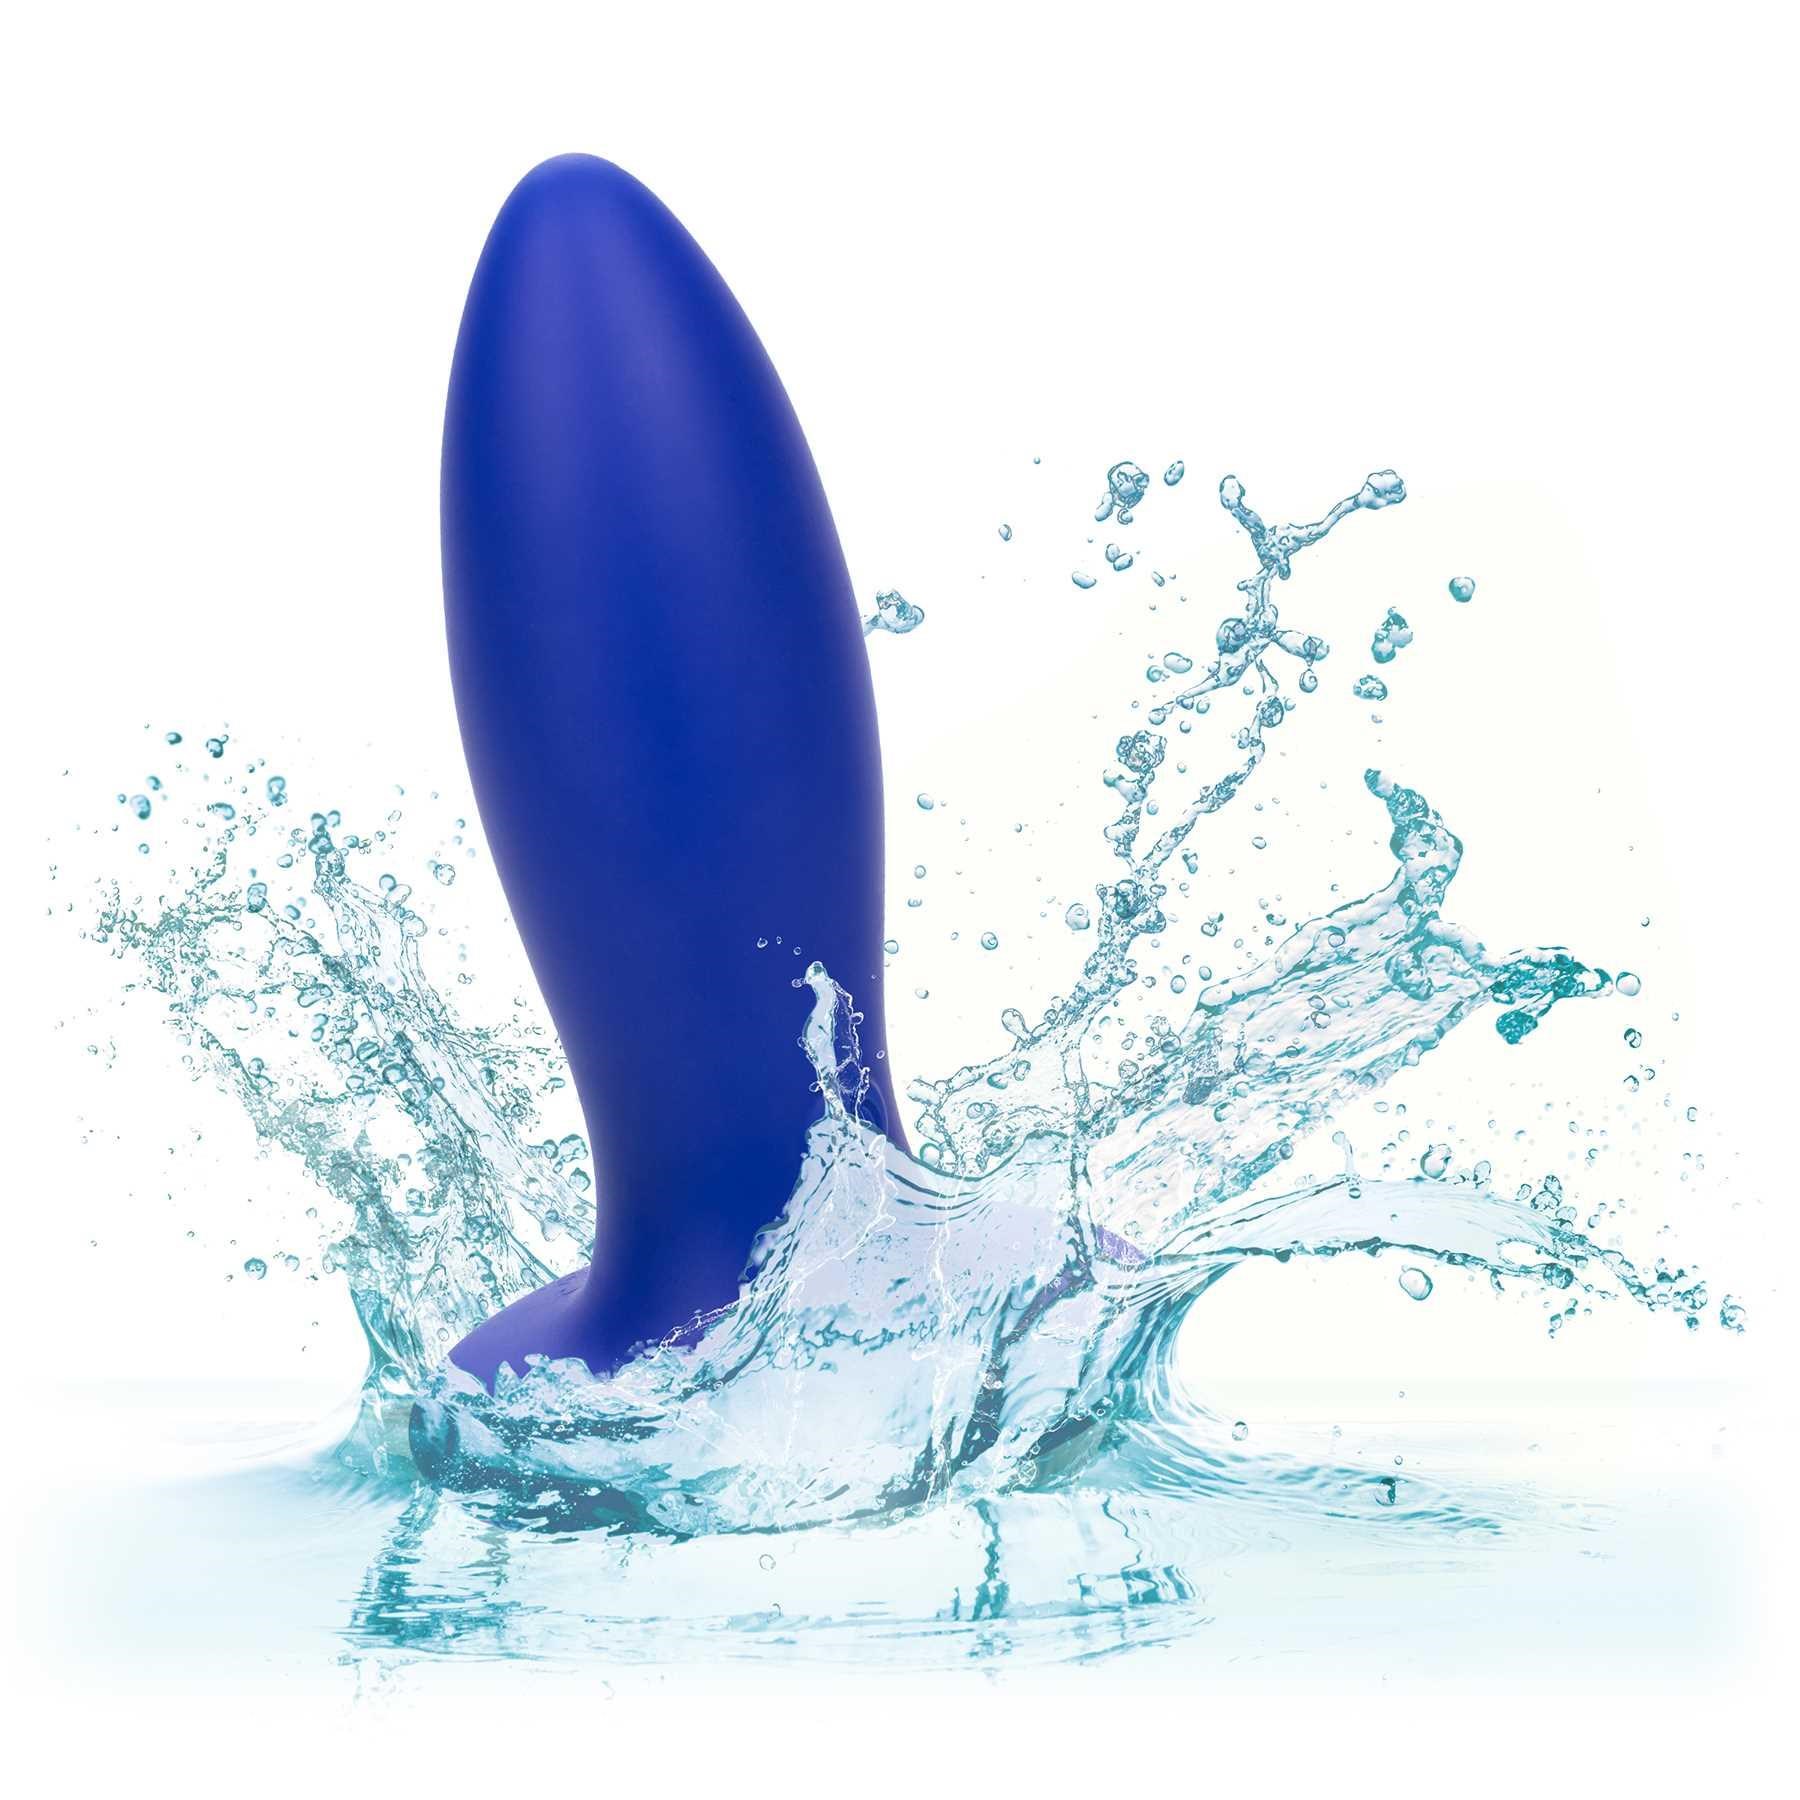 Admiral Liquid Silicone Vibrating Torpedo Anal Plug in water